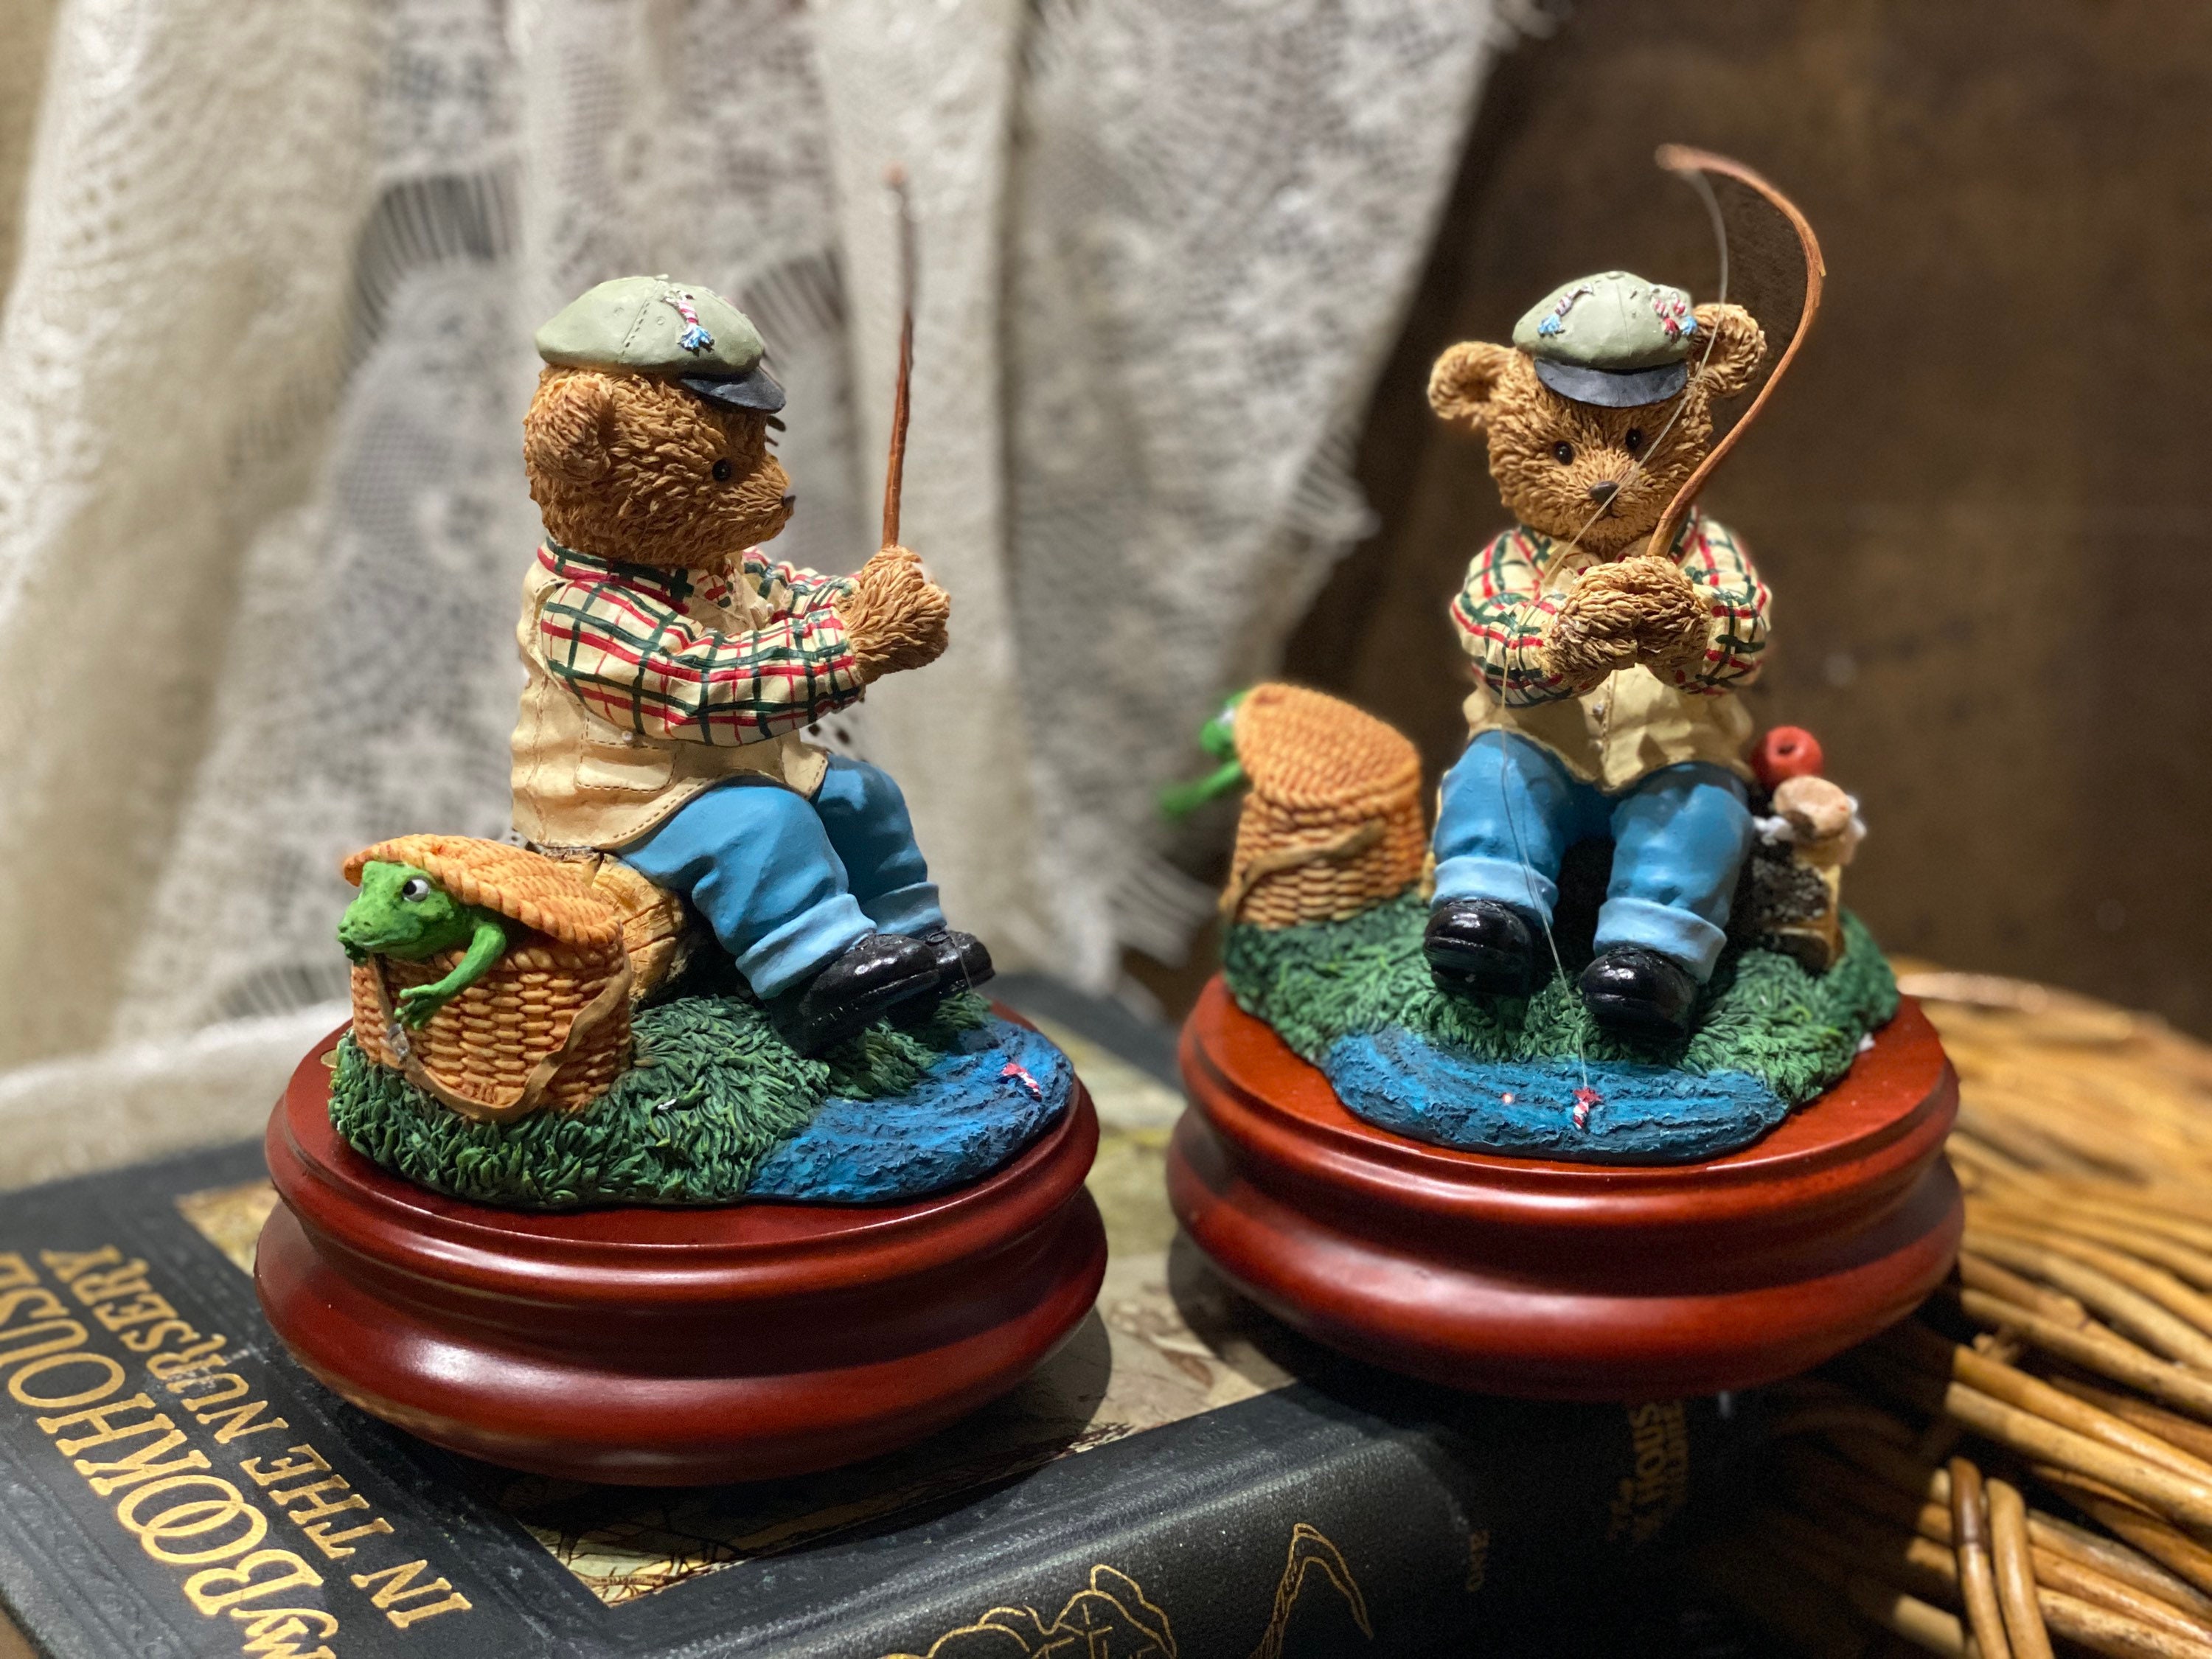 Buy Boy Fishing Statue Online In India -  India